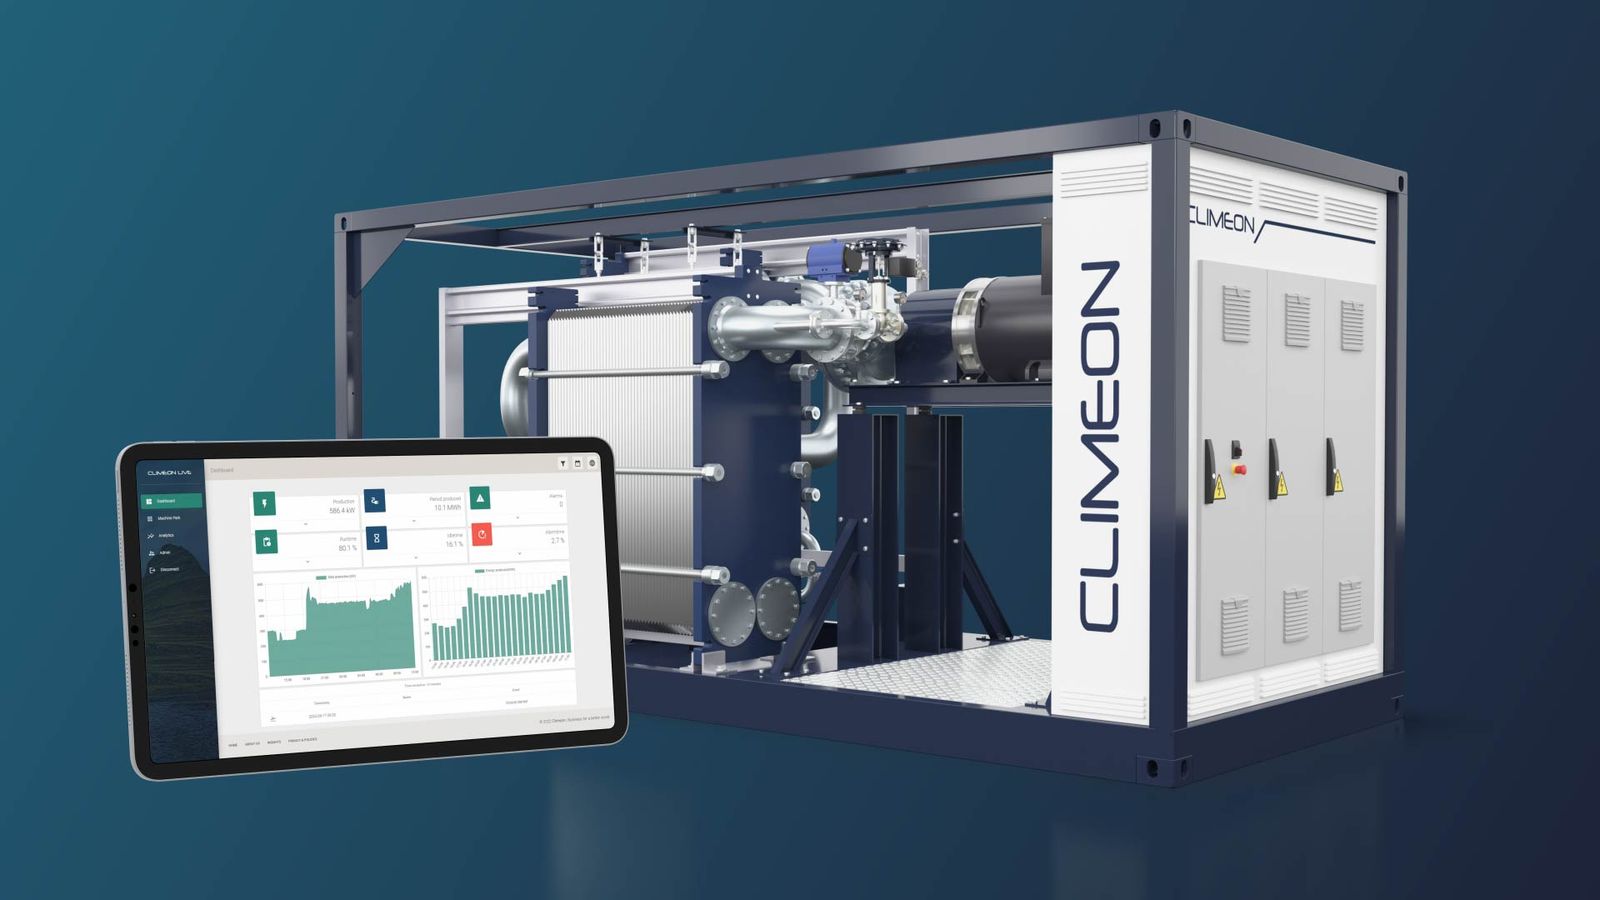 Climeon Launches New Waste Heat Recovery Technology